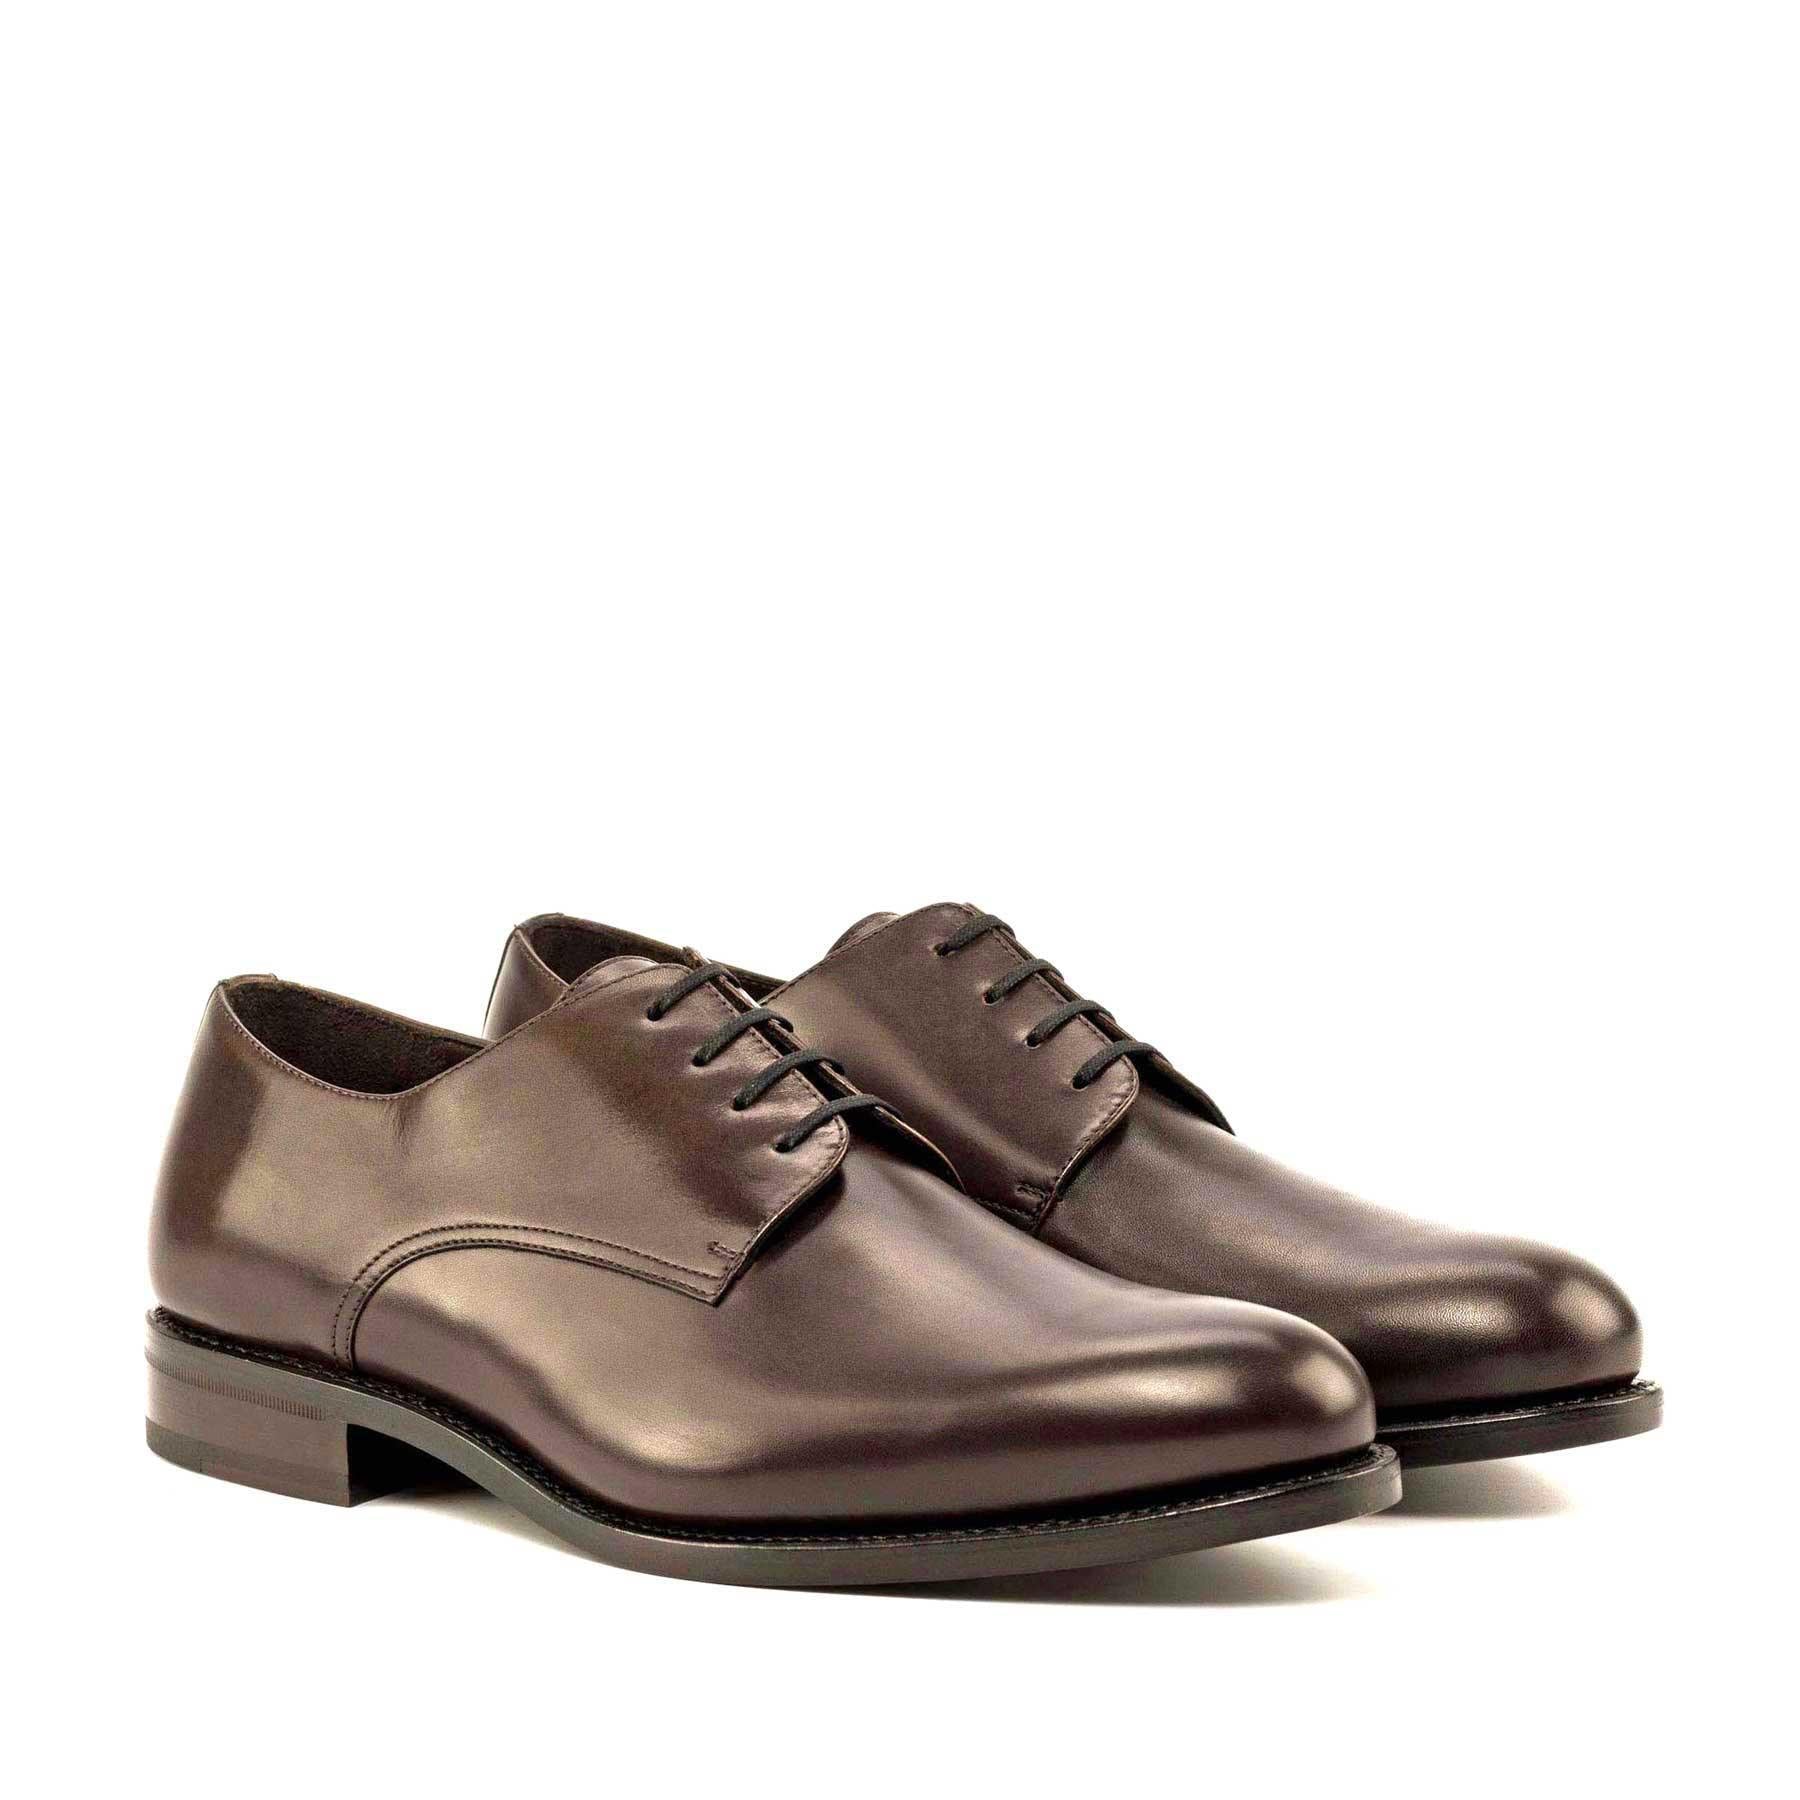 Handmade Derby Shoes for Men in Dark Brown Calf Leather 8